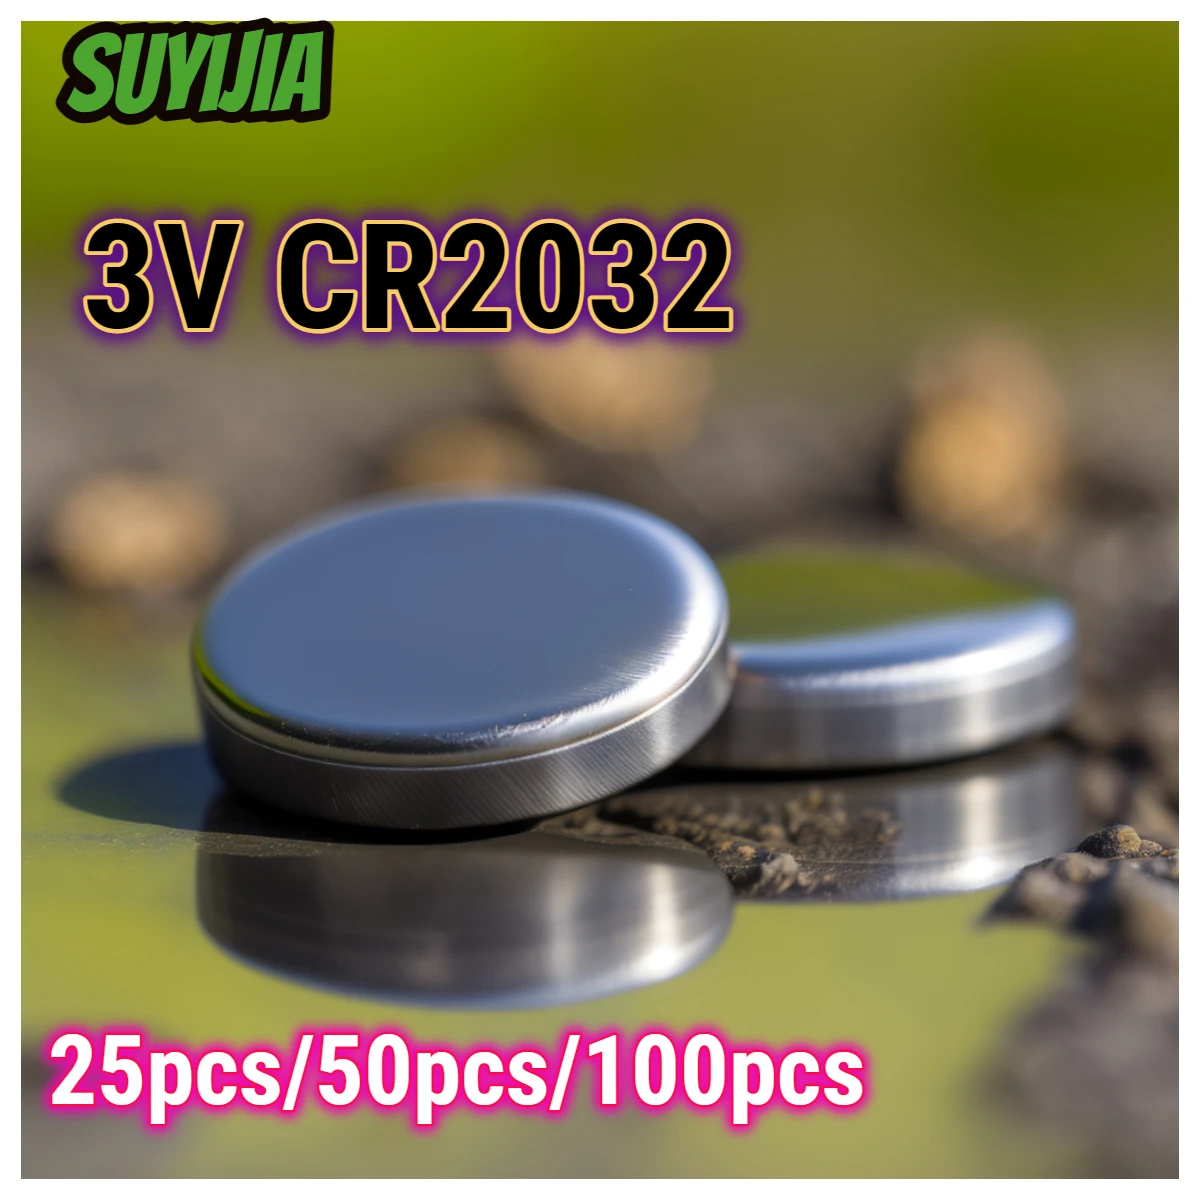 

SUYIJIA CR2032 Battery 3V 25pcs/50pcs/100pcs Lithium Battery Button Cell Coin Batteries for Watches Calculators Toys